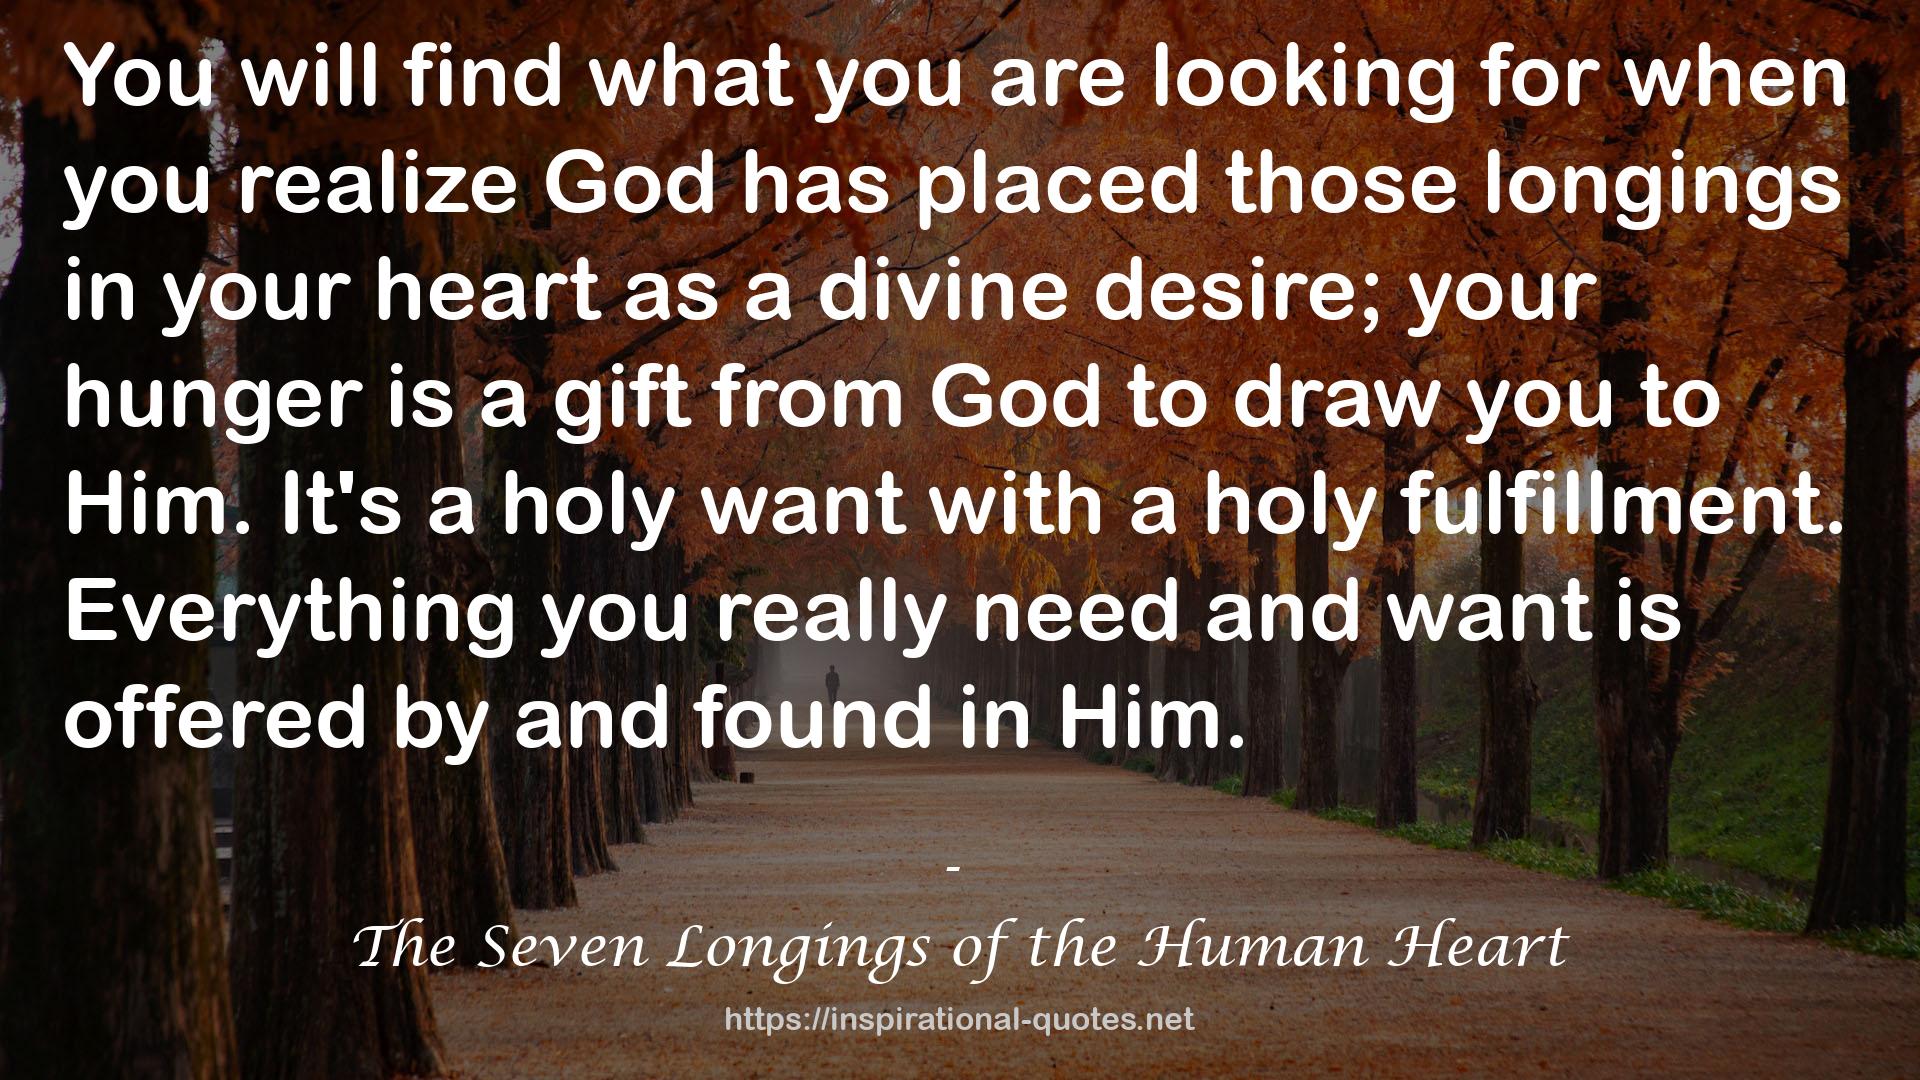 The Seven Longings of the Human Heart QUOTES